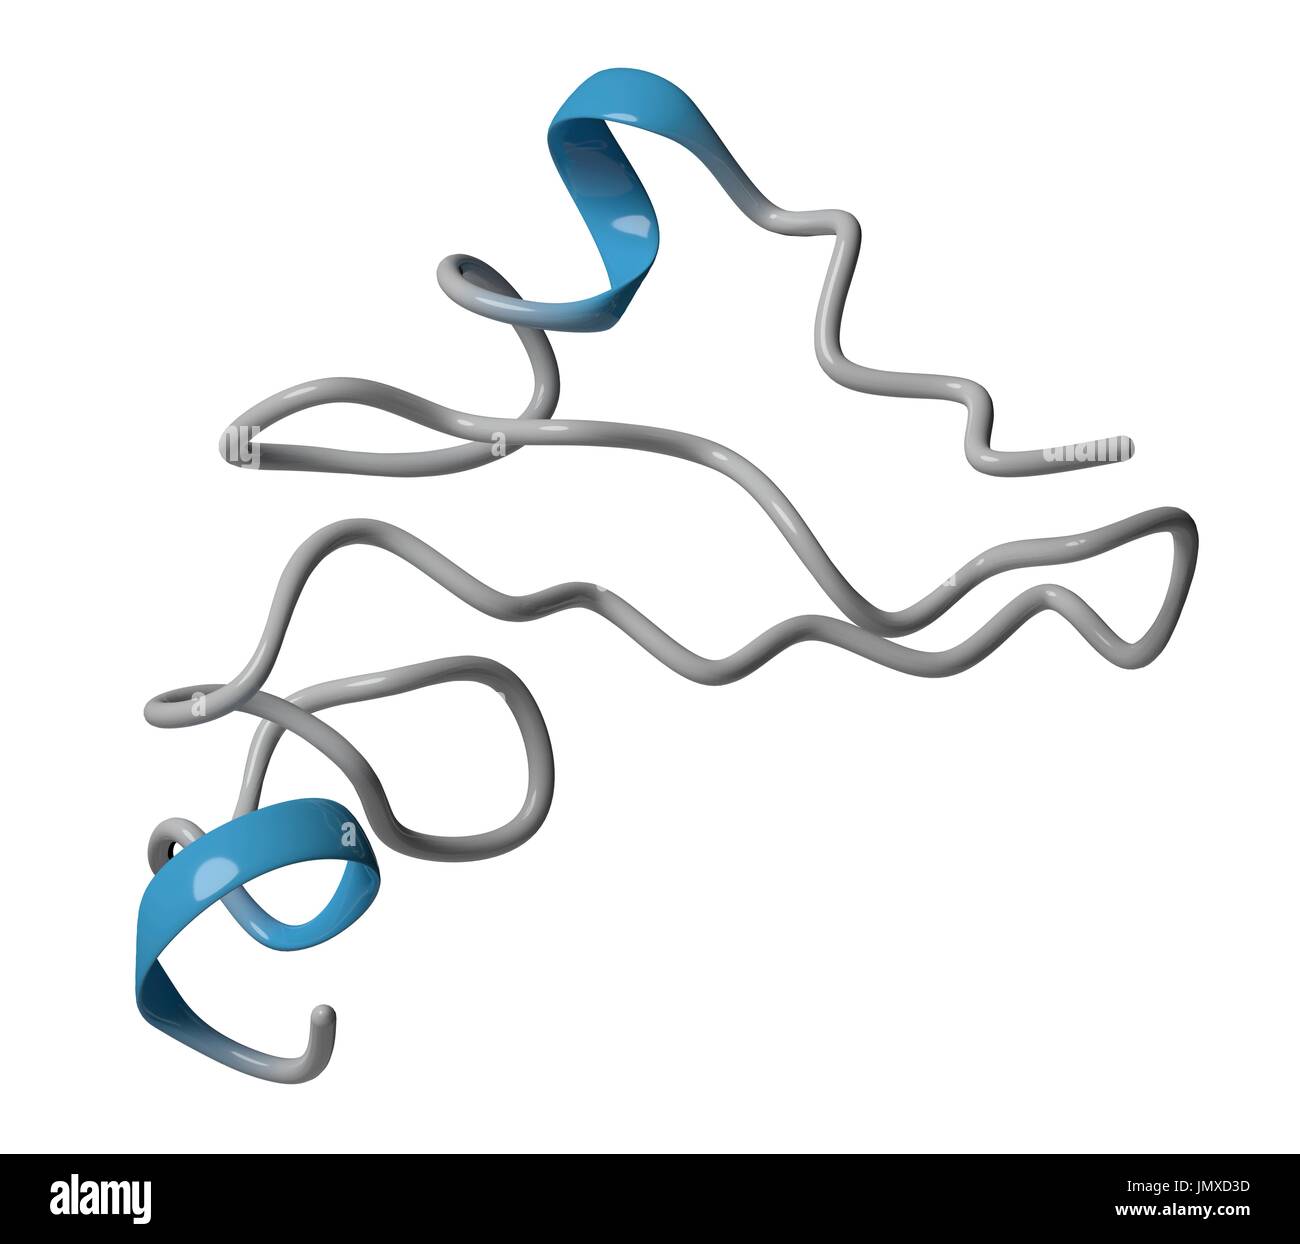 Epidermal growth factor (EGF) signalling protein molecule. Cartoon model, secondary structure colouring (helices blue). Stock Photo